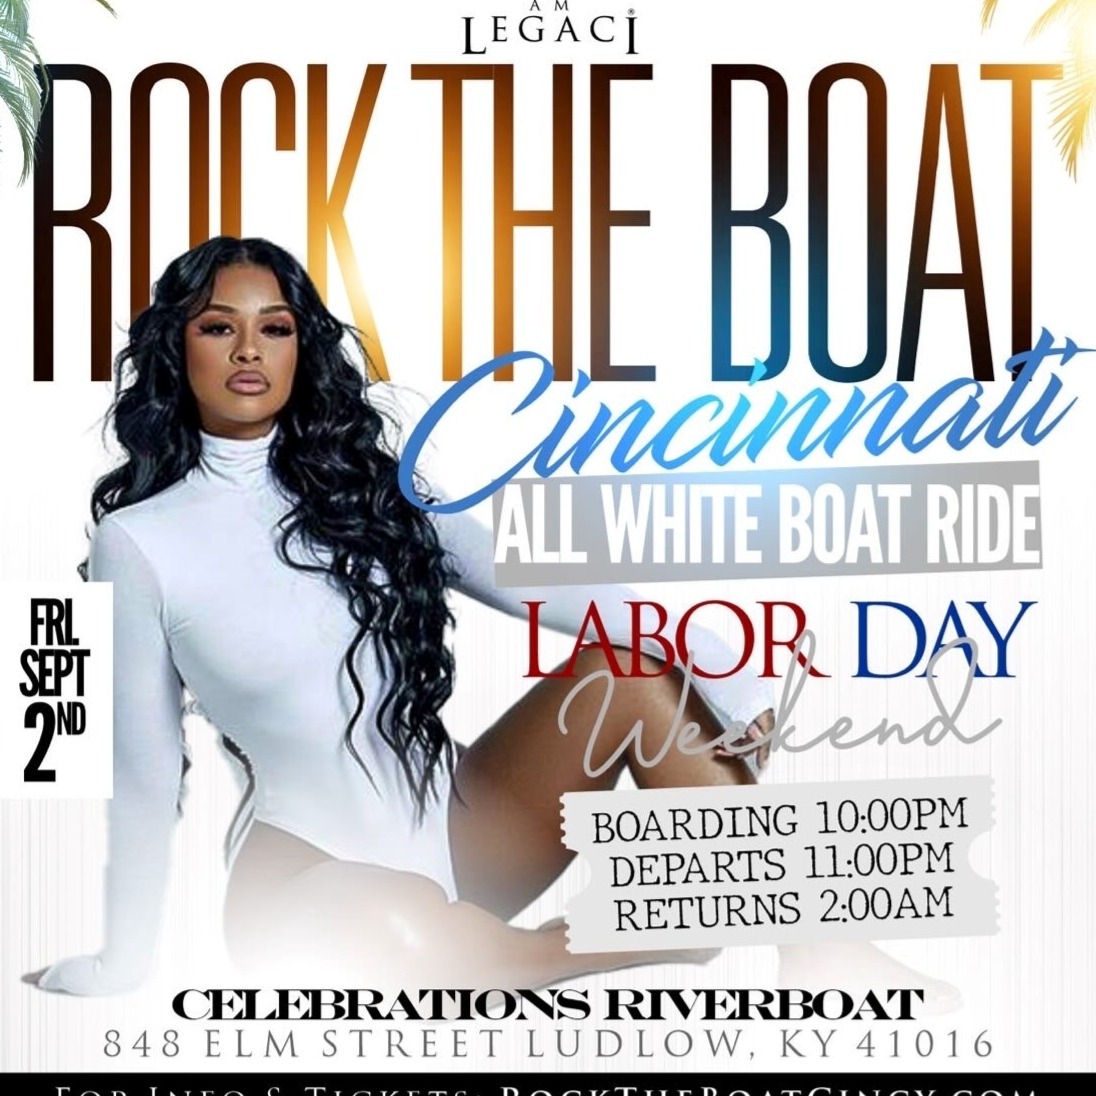 ROCK THE BOAT CINCINNATI ALL WHITE BOAT RIDE PARTY LABOR DAY WEEKEND 2022